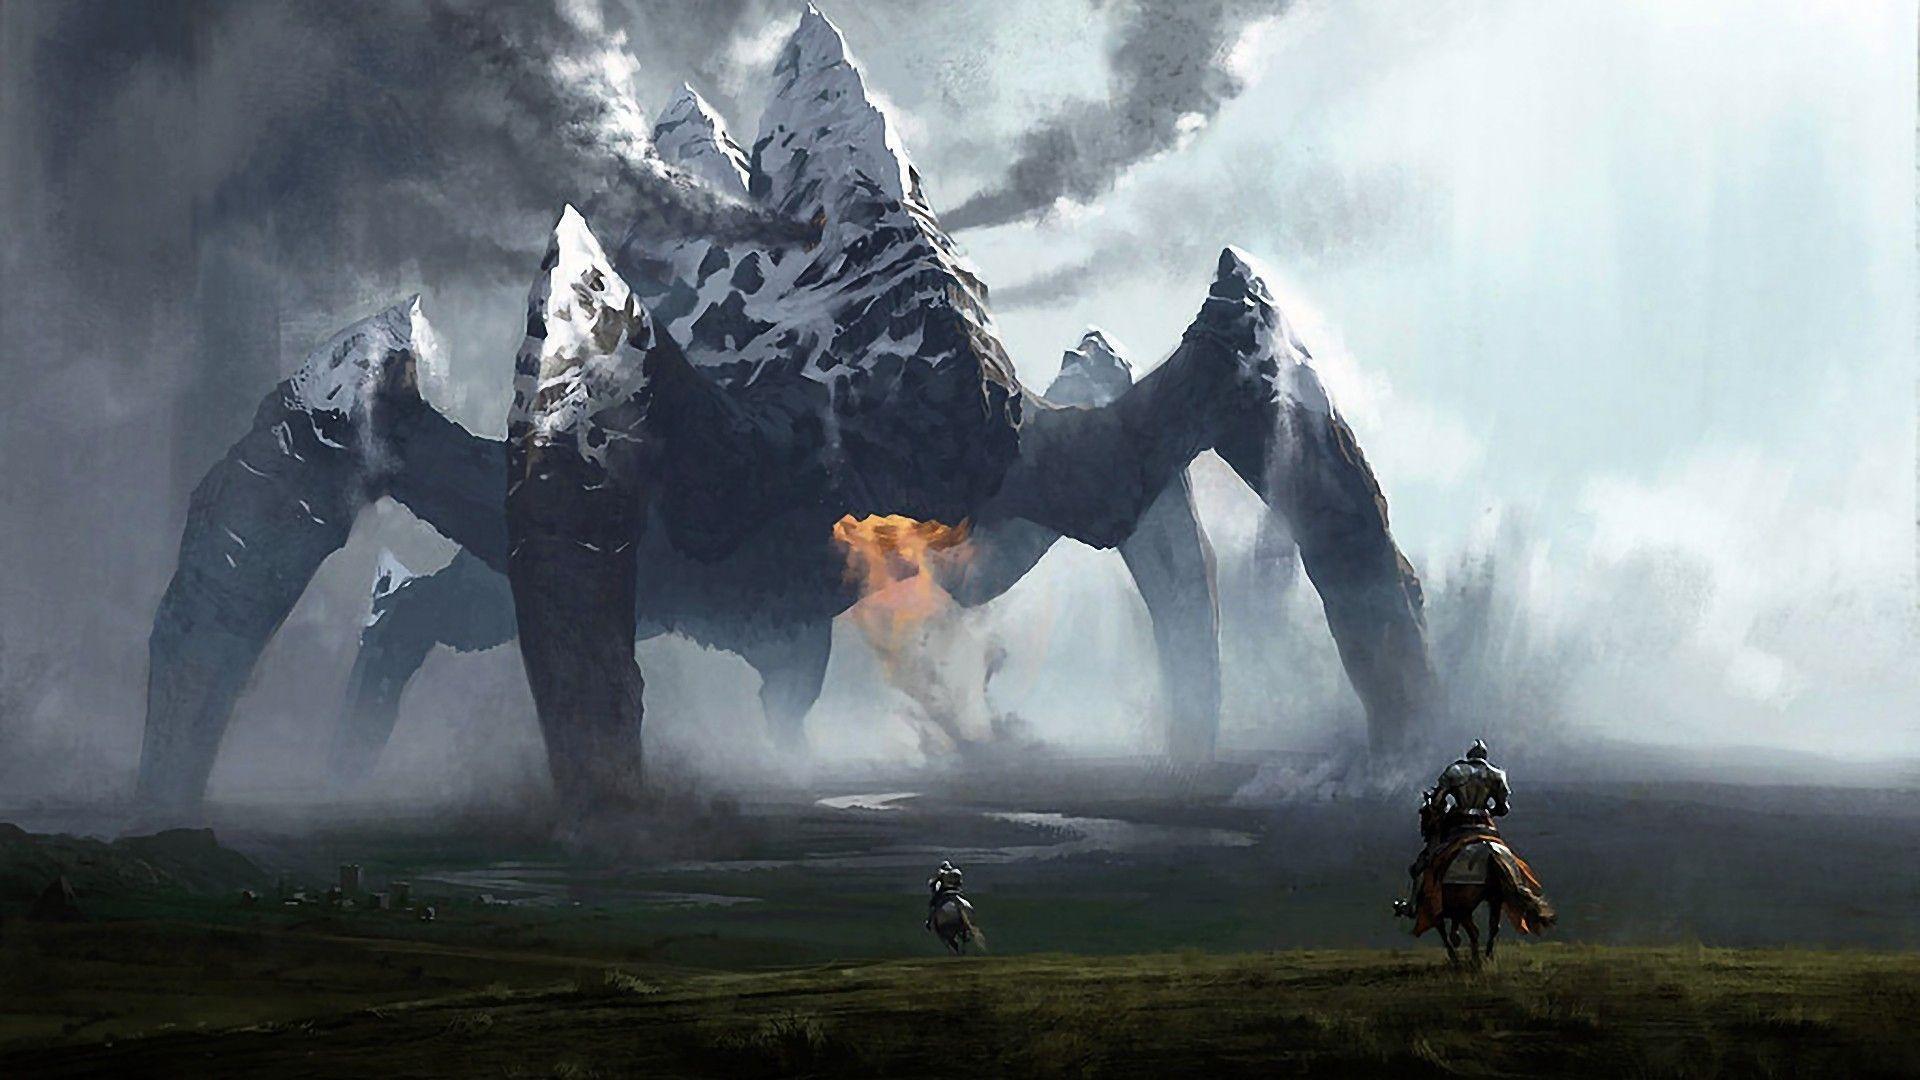 Wallpapers wallpapers from Shadow of the Colossus